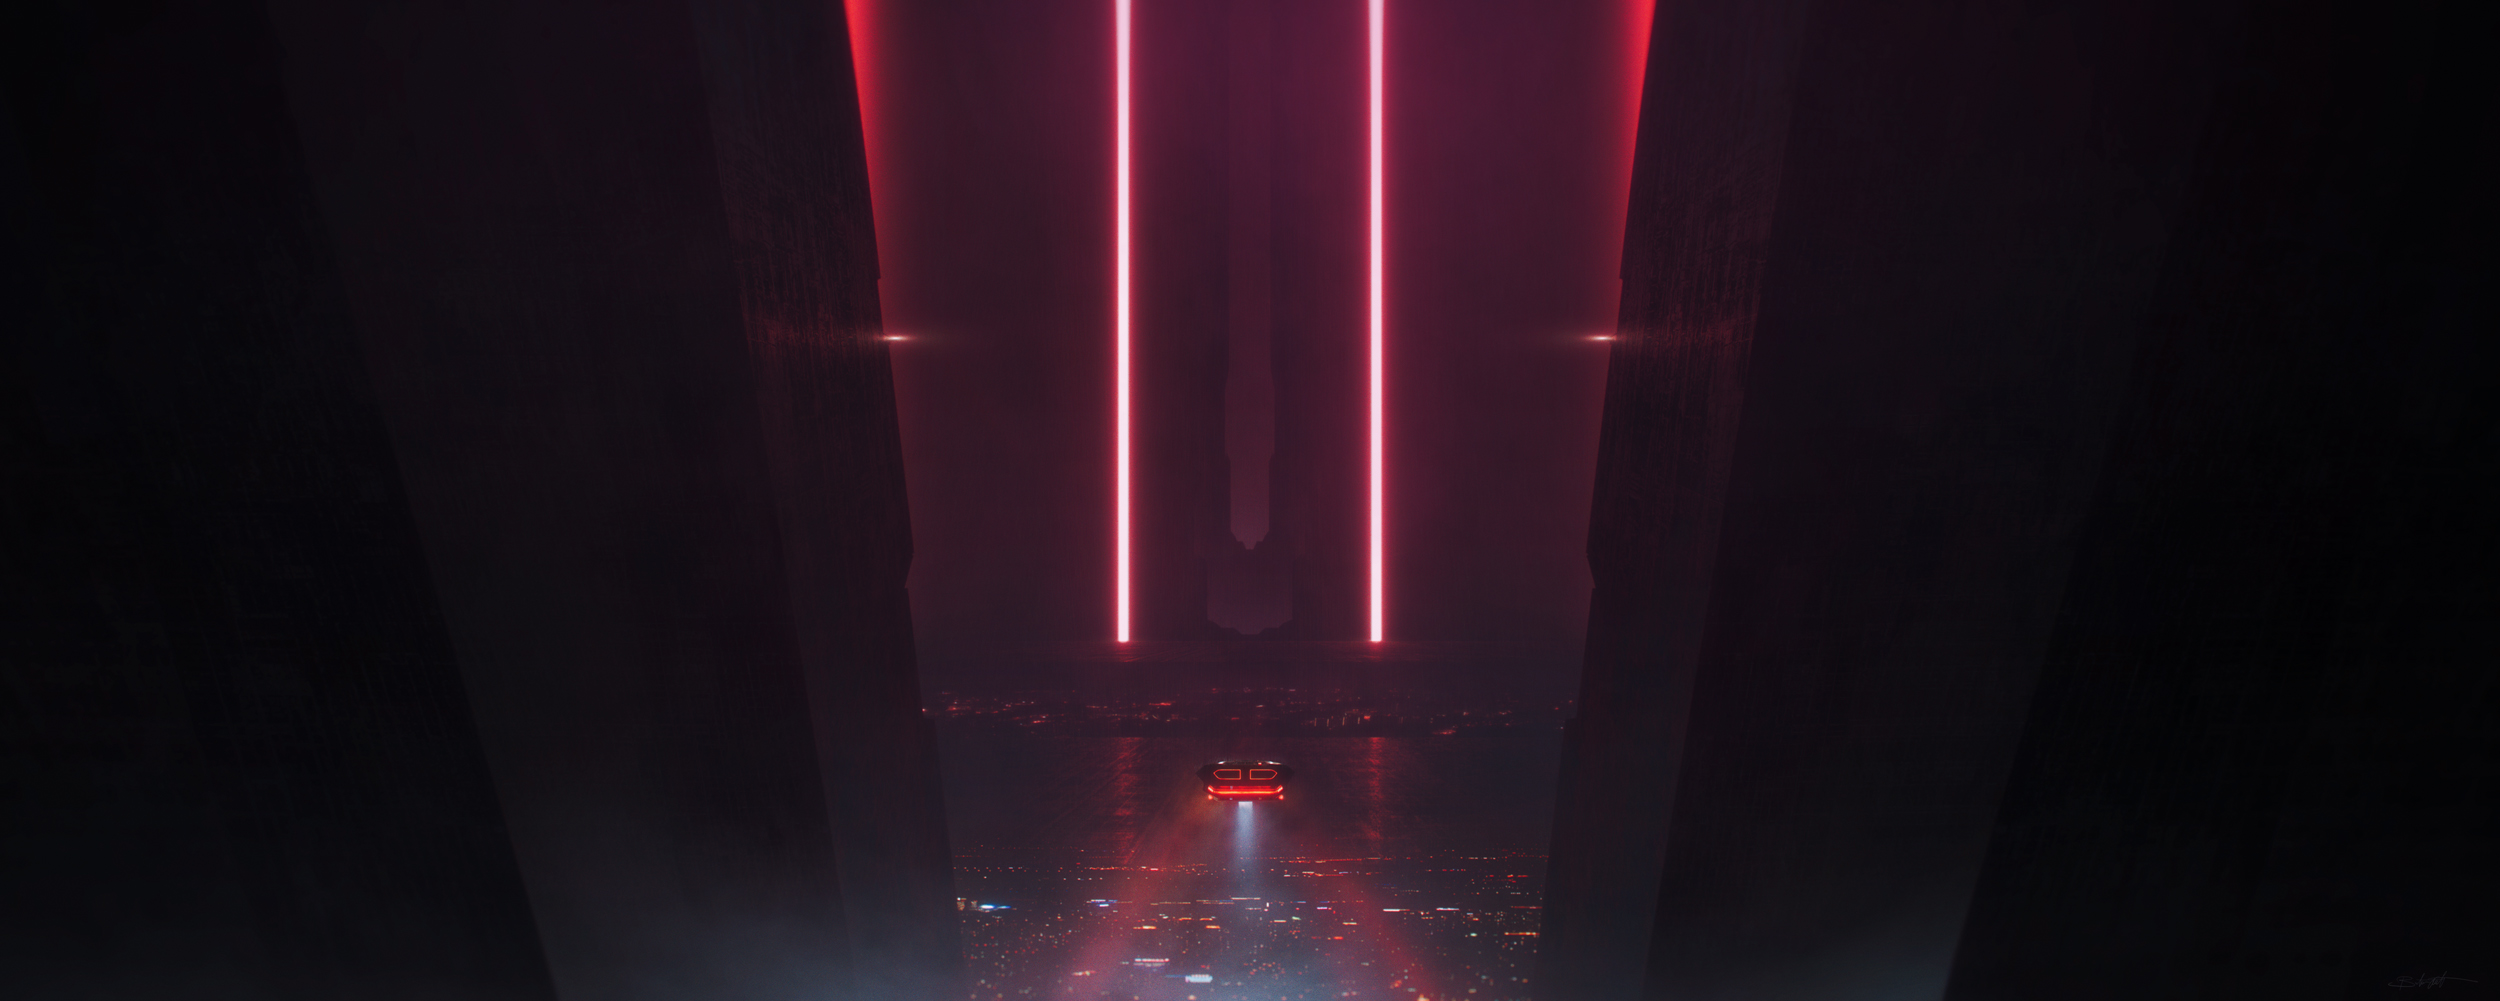 General 2500x1001 science fiction Blade Runner 2049 movies 2049 (Year) screen shot